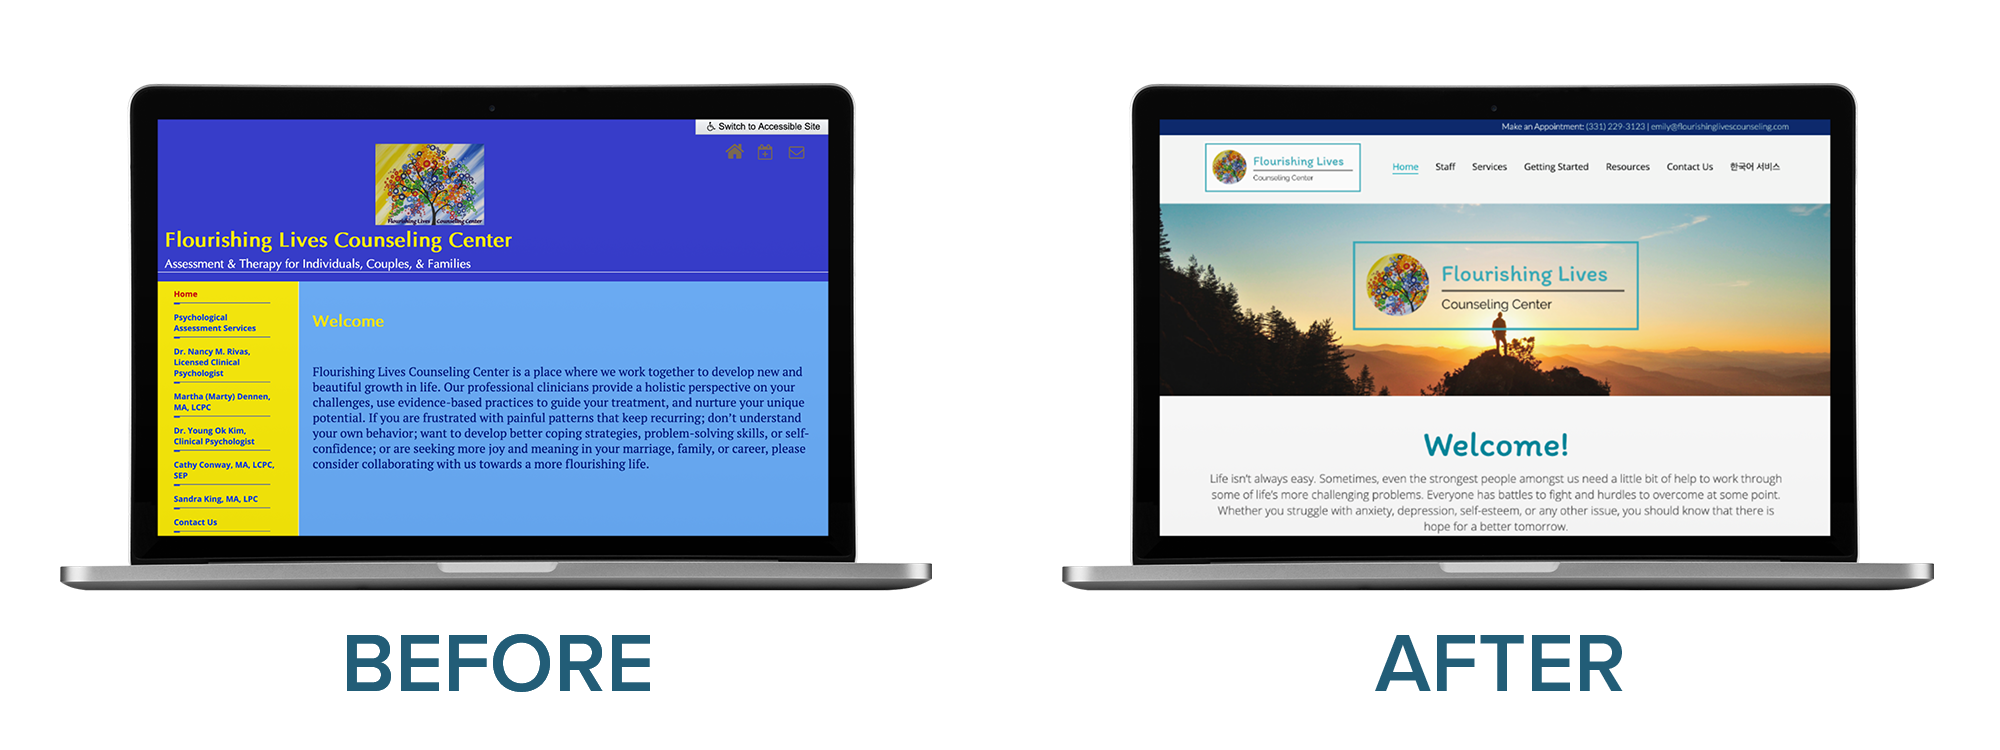 Flourishing Lives Counseling Center Website Redesign | Before & After Website Transformations: From TherapySites to Brighter Vision | Brighter Vision Web Solutions | Marketing Blog for Therapists